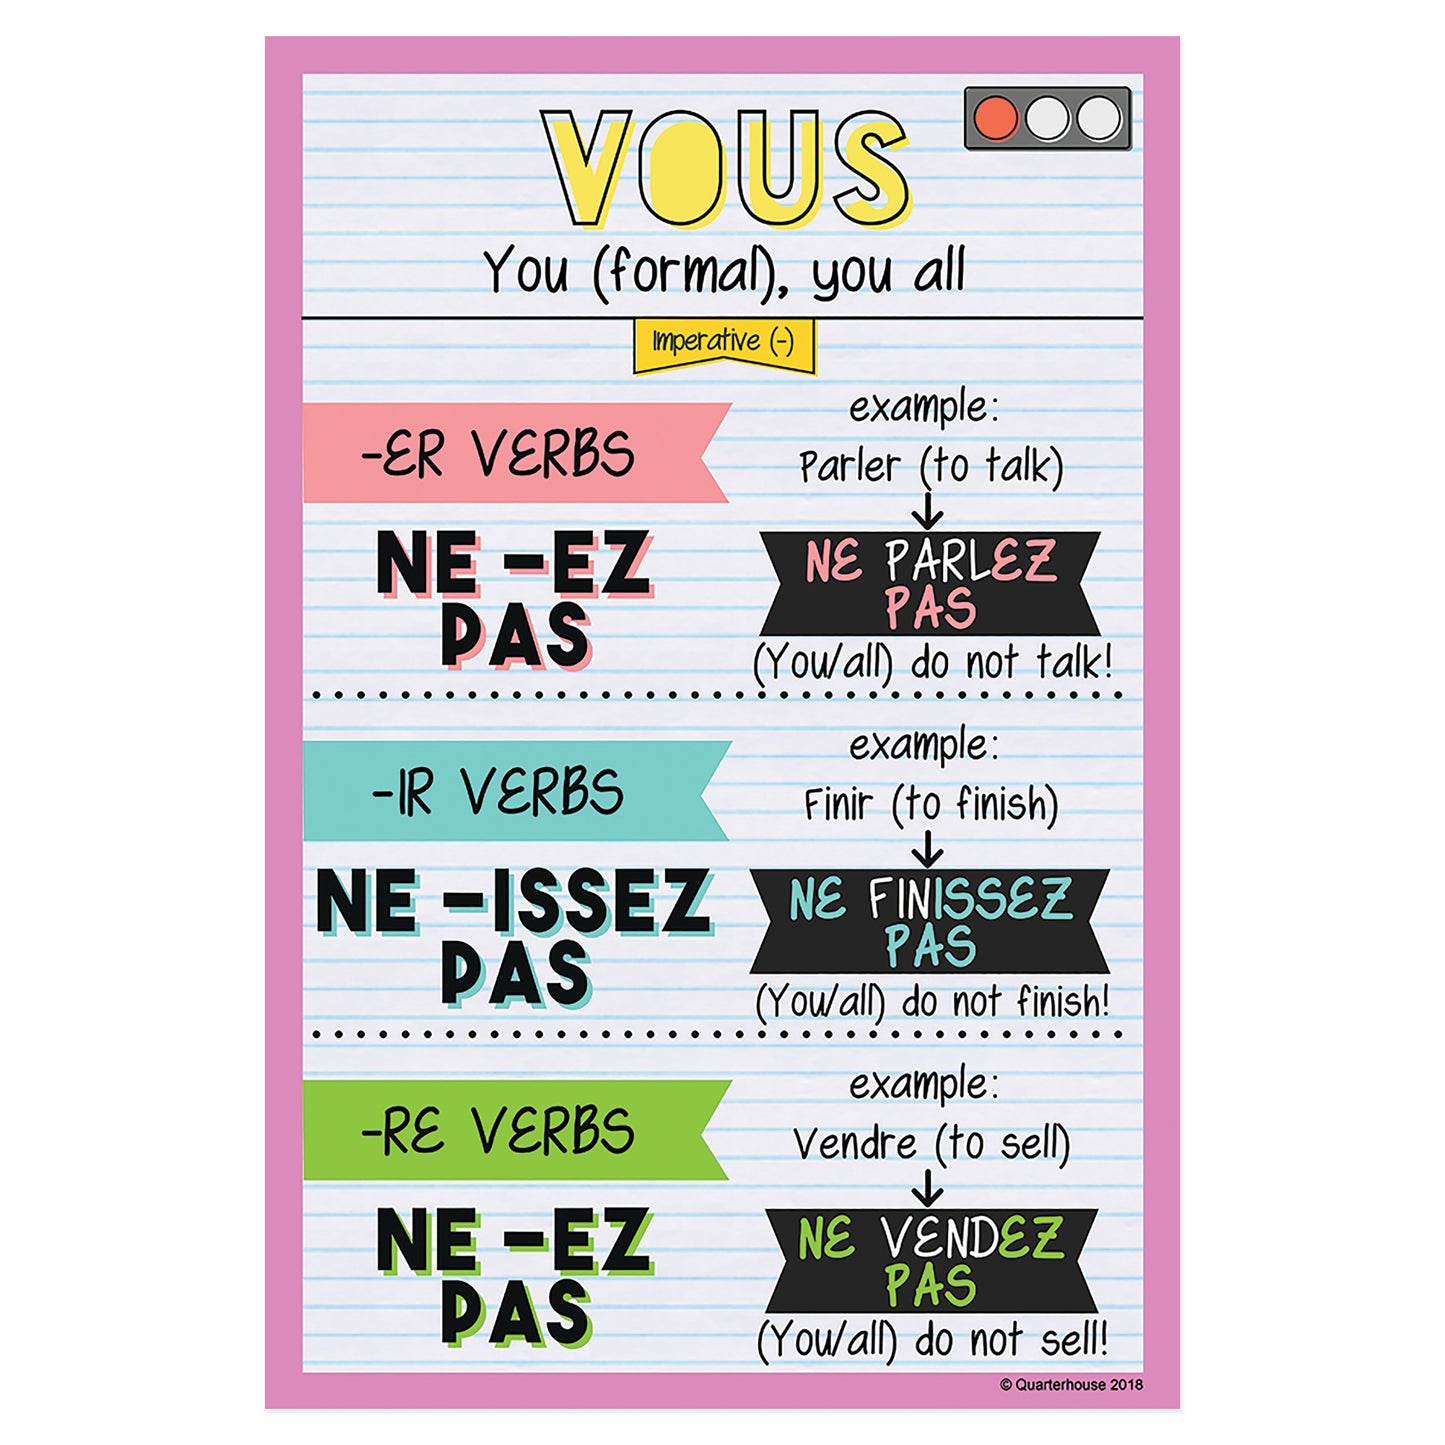 Quarterhouse Vous - Imperative (Negative) Tense French Verb Conjugation Poster, French and ESL Classroom Materials for Teachers